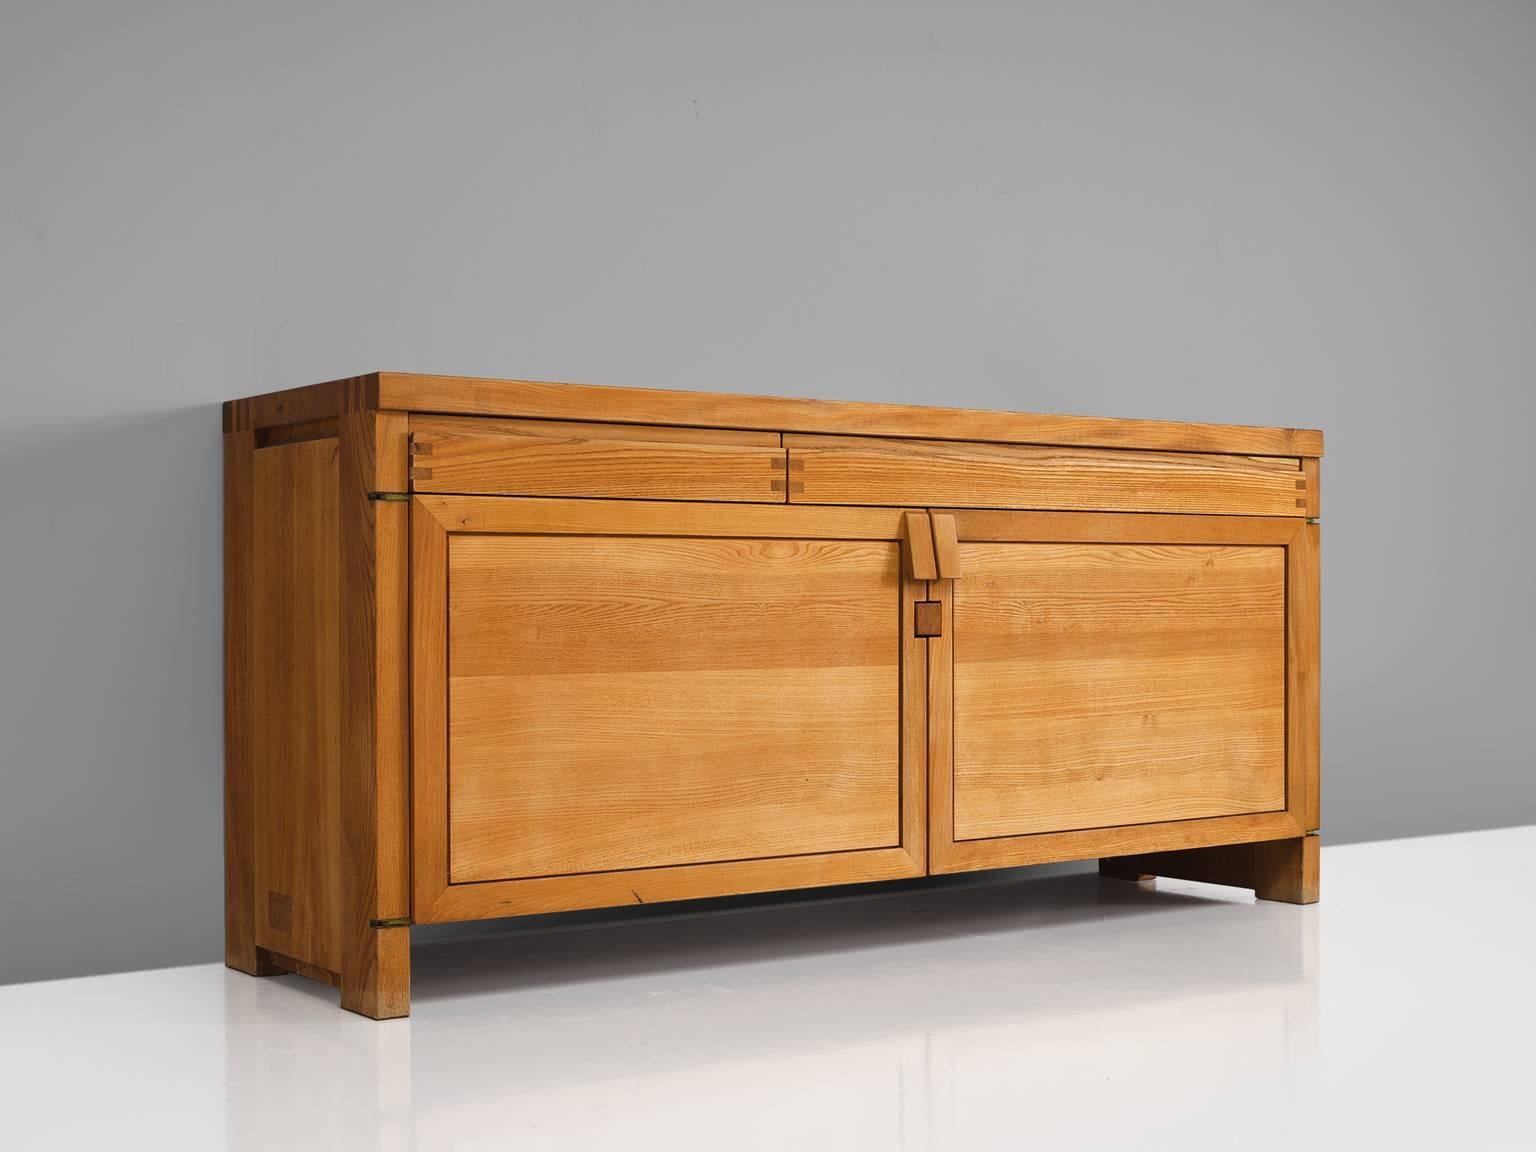 Pierre Chapo, sideboard, two-door sideboard model R08, elm, France, 1964.

This exquisitely crafted credenza combines a simplified yet complex design combined with nifty, solid construction details that characterize Chapo's work. The well